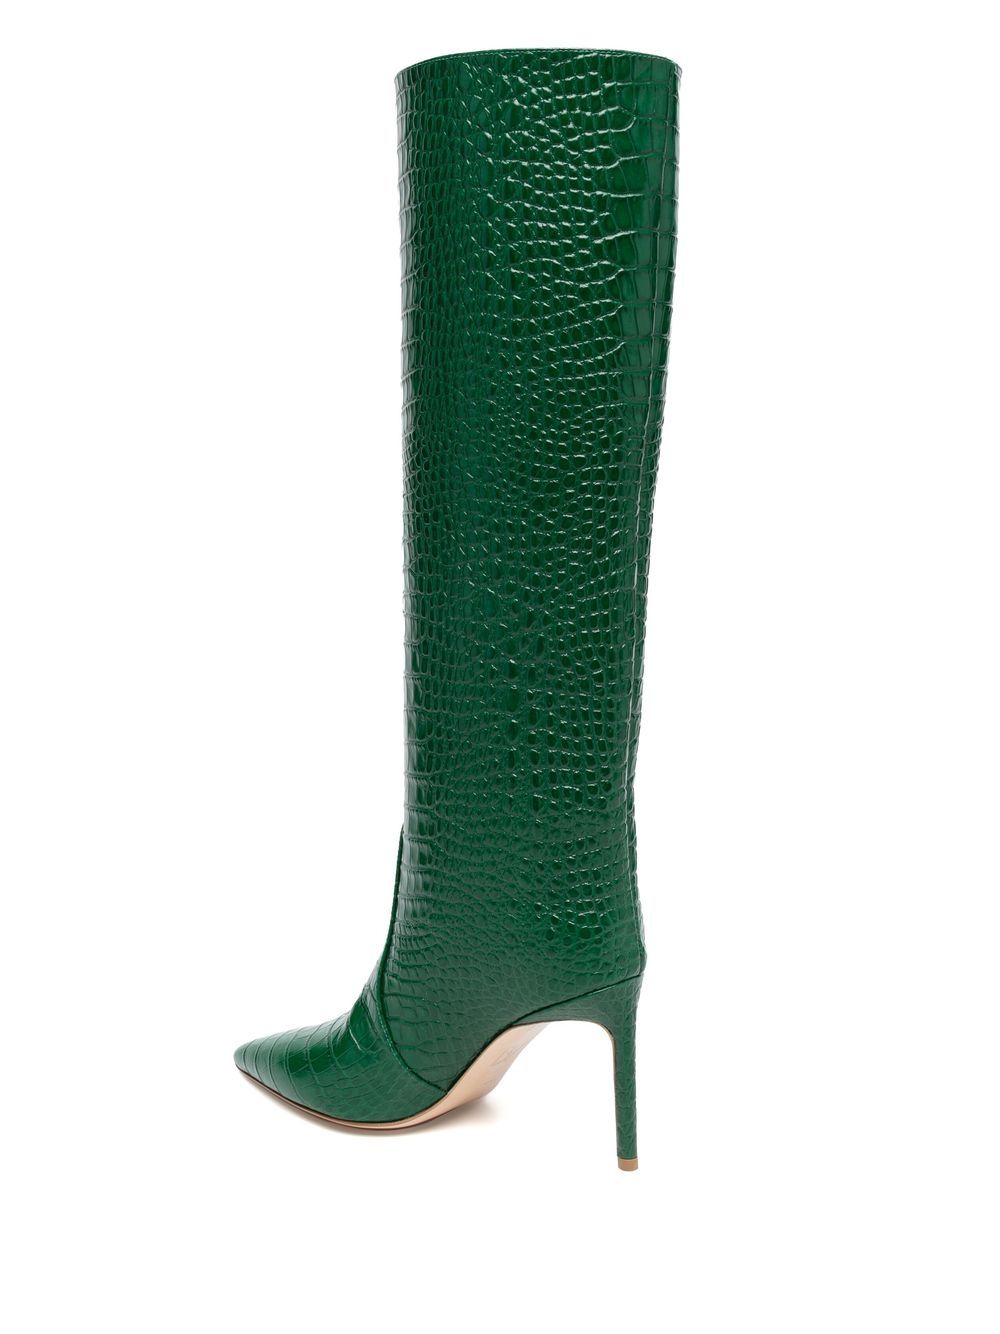 Green Crocodile Skin Leather Pointed Toe Knee High Boots